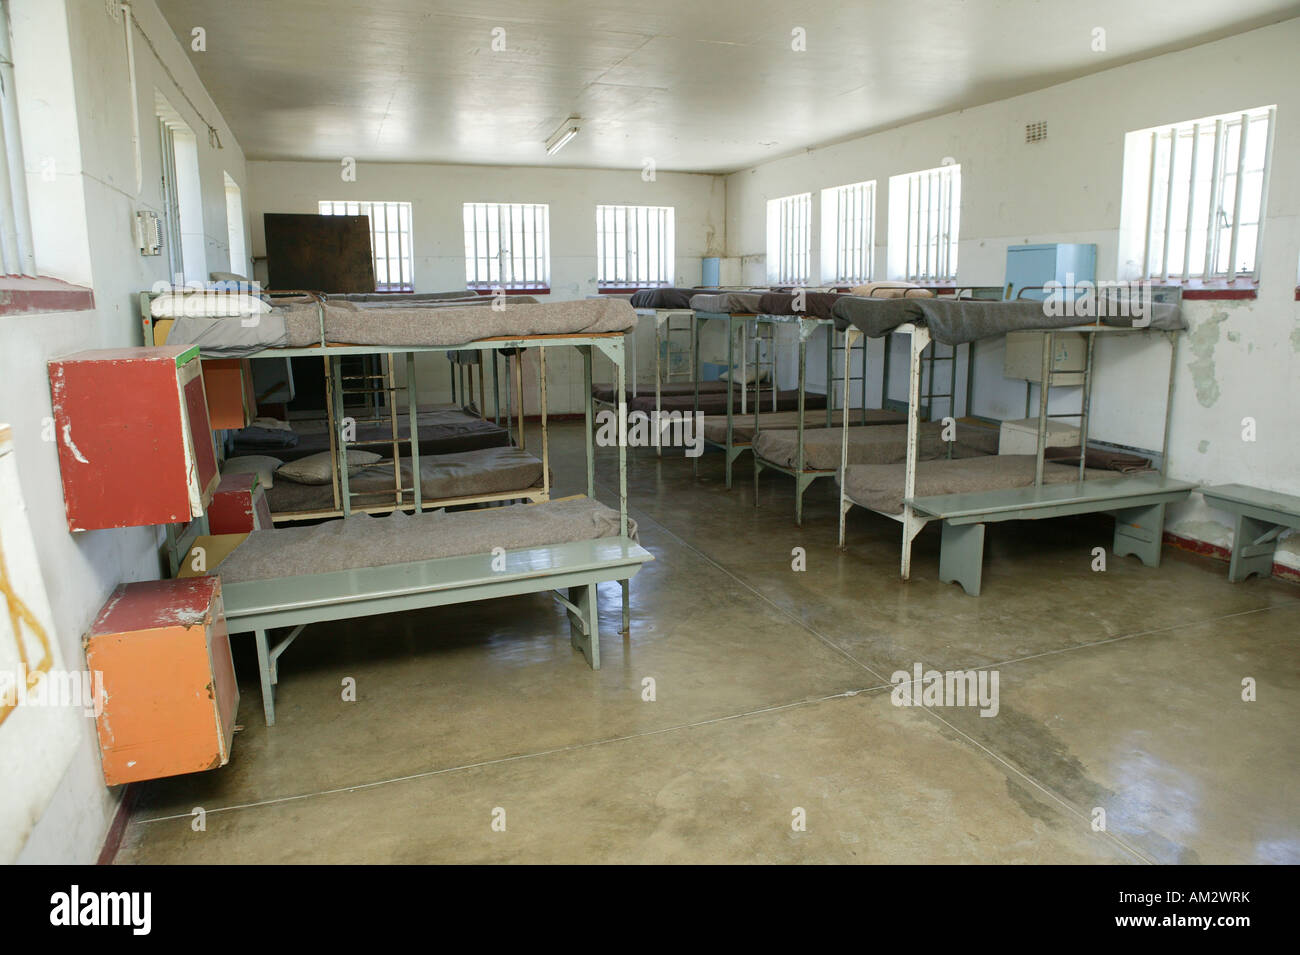 Common cell on the former prison island Robben Island, South Africa Stock Photo